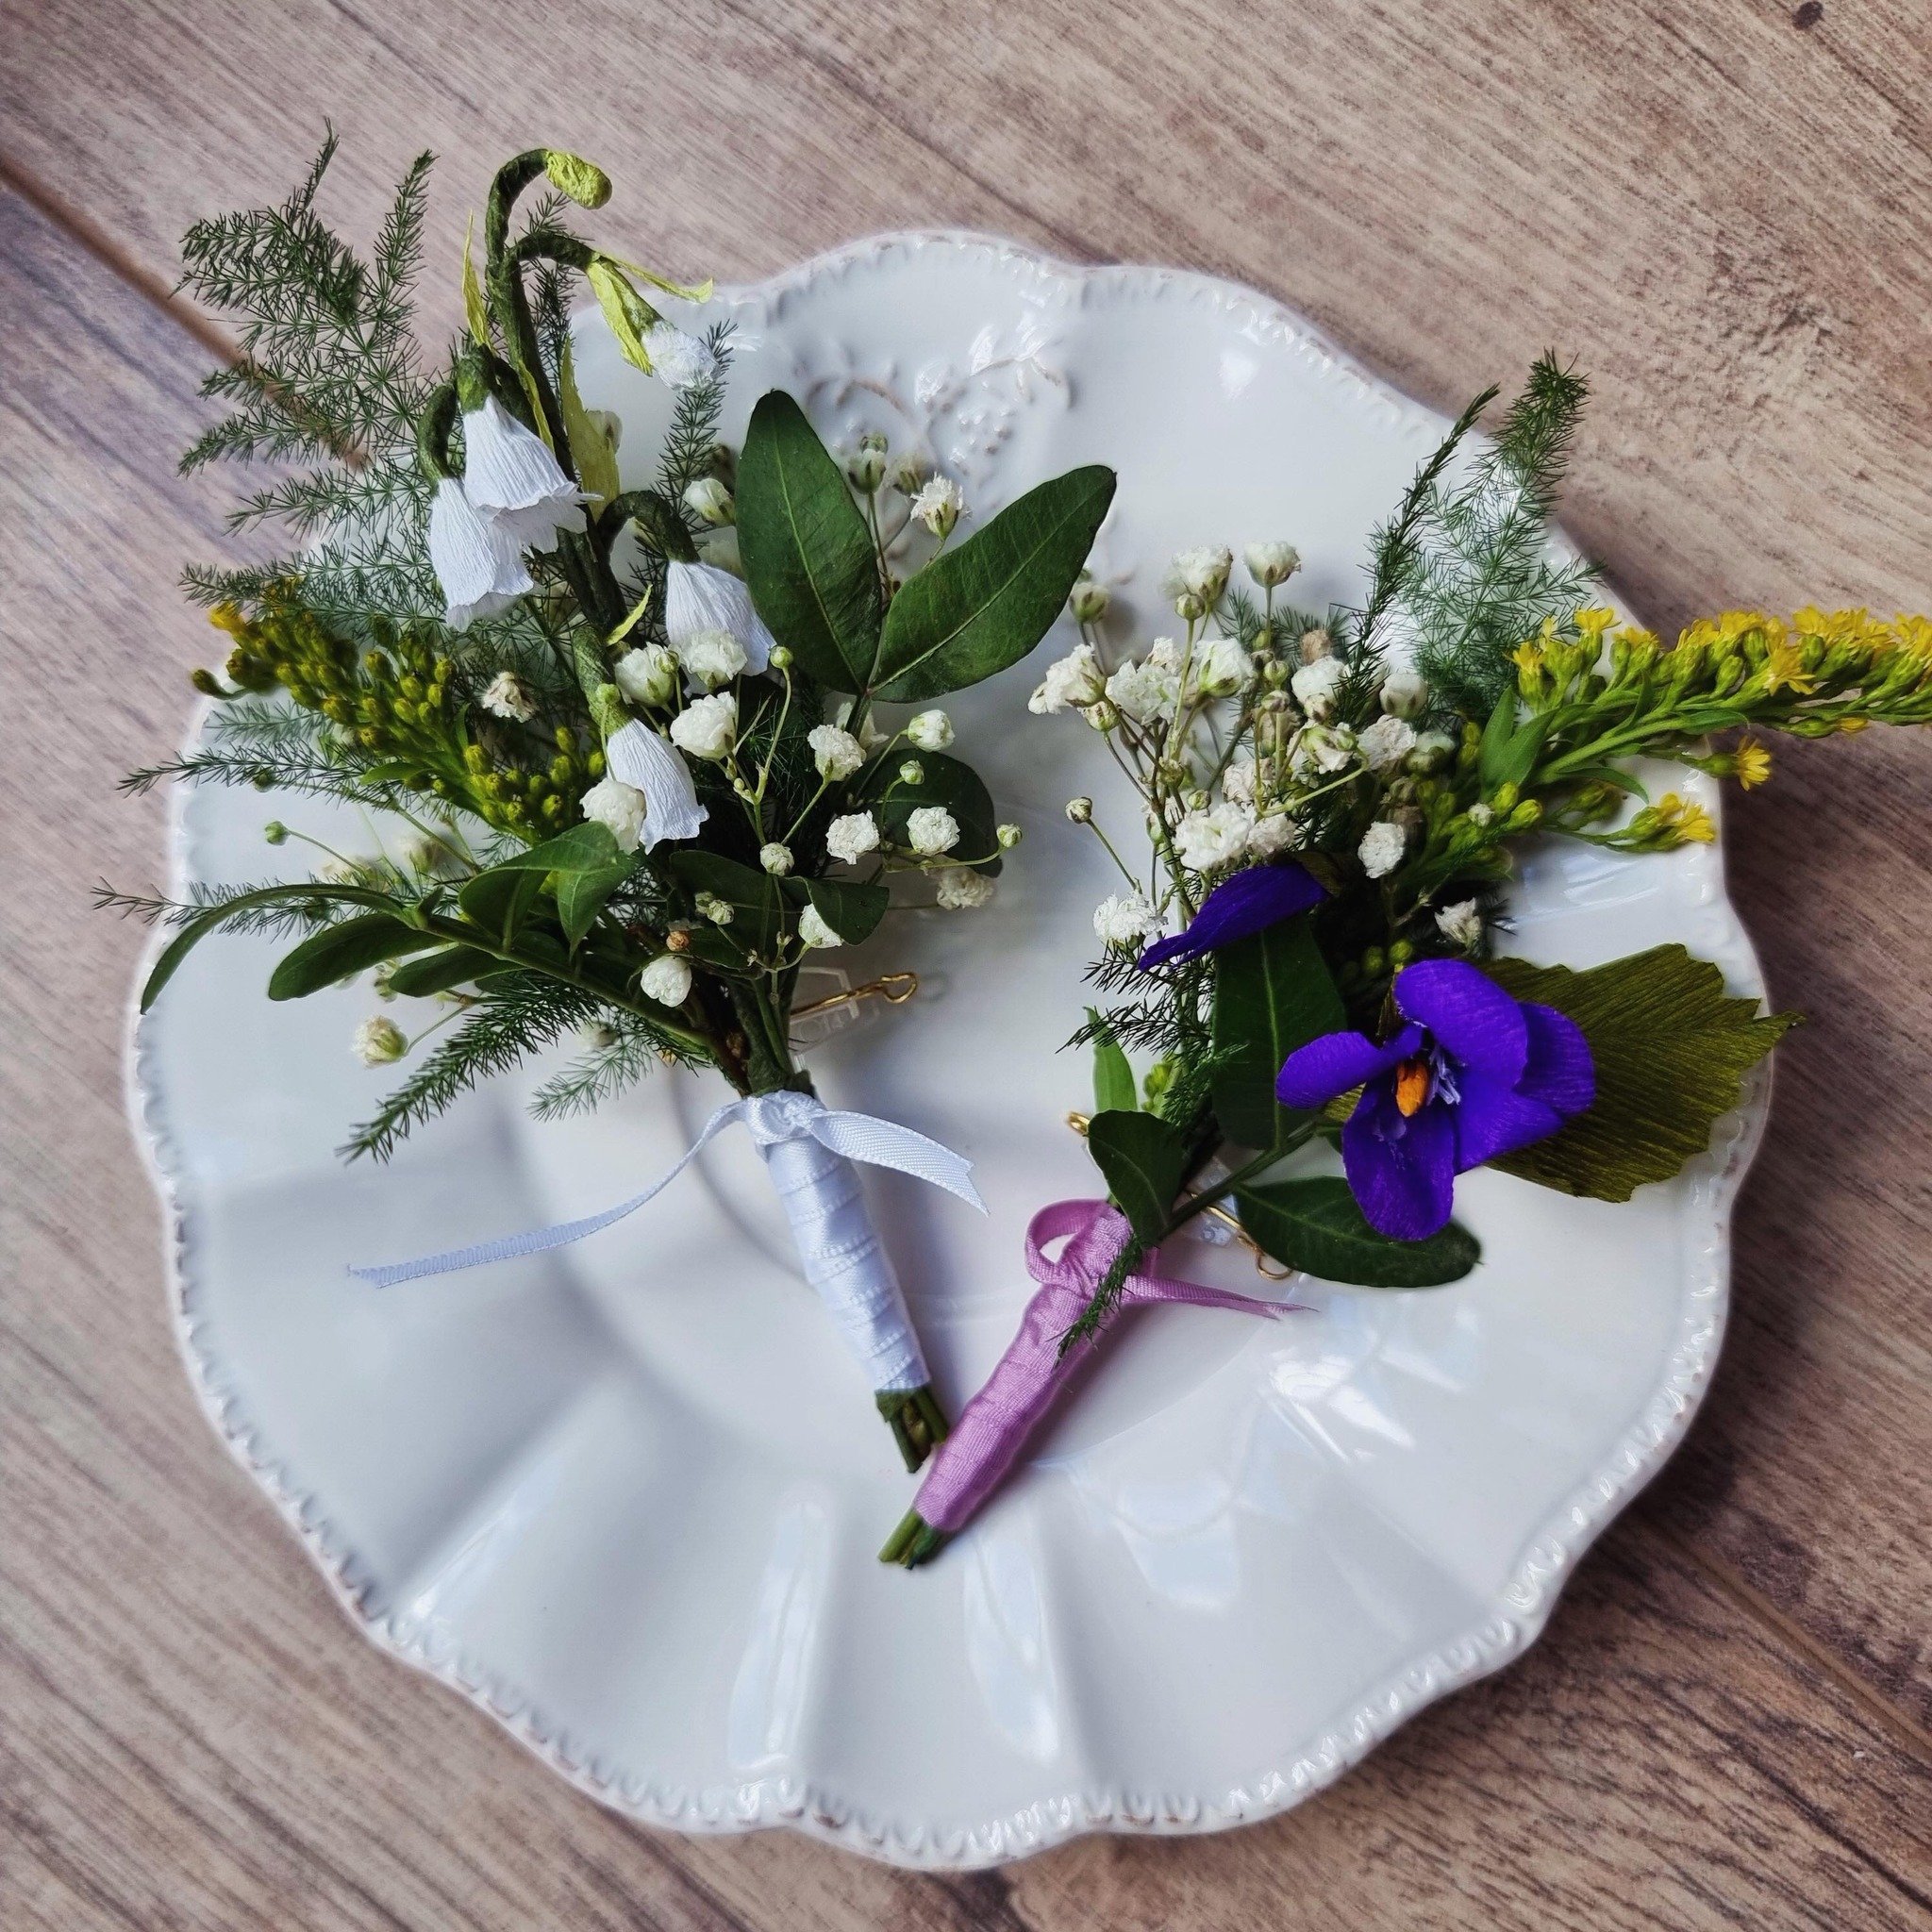 The grooms wanted to represent each other&rsquo;s birth month with the corresponding flower-Violet for February and Lily of the Valley for May. Not finding the flowers I needed, I created them in paper and mixed a few real flowers in. This also gives